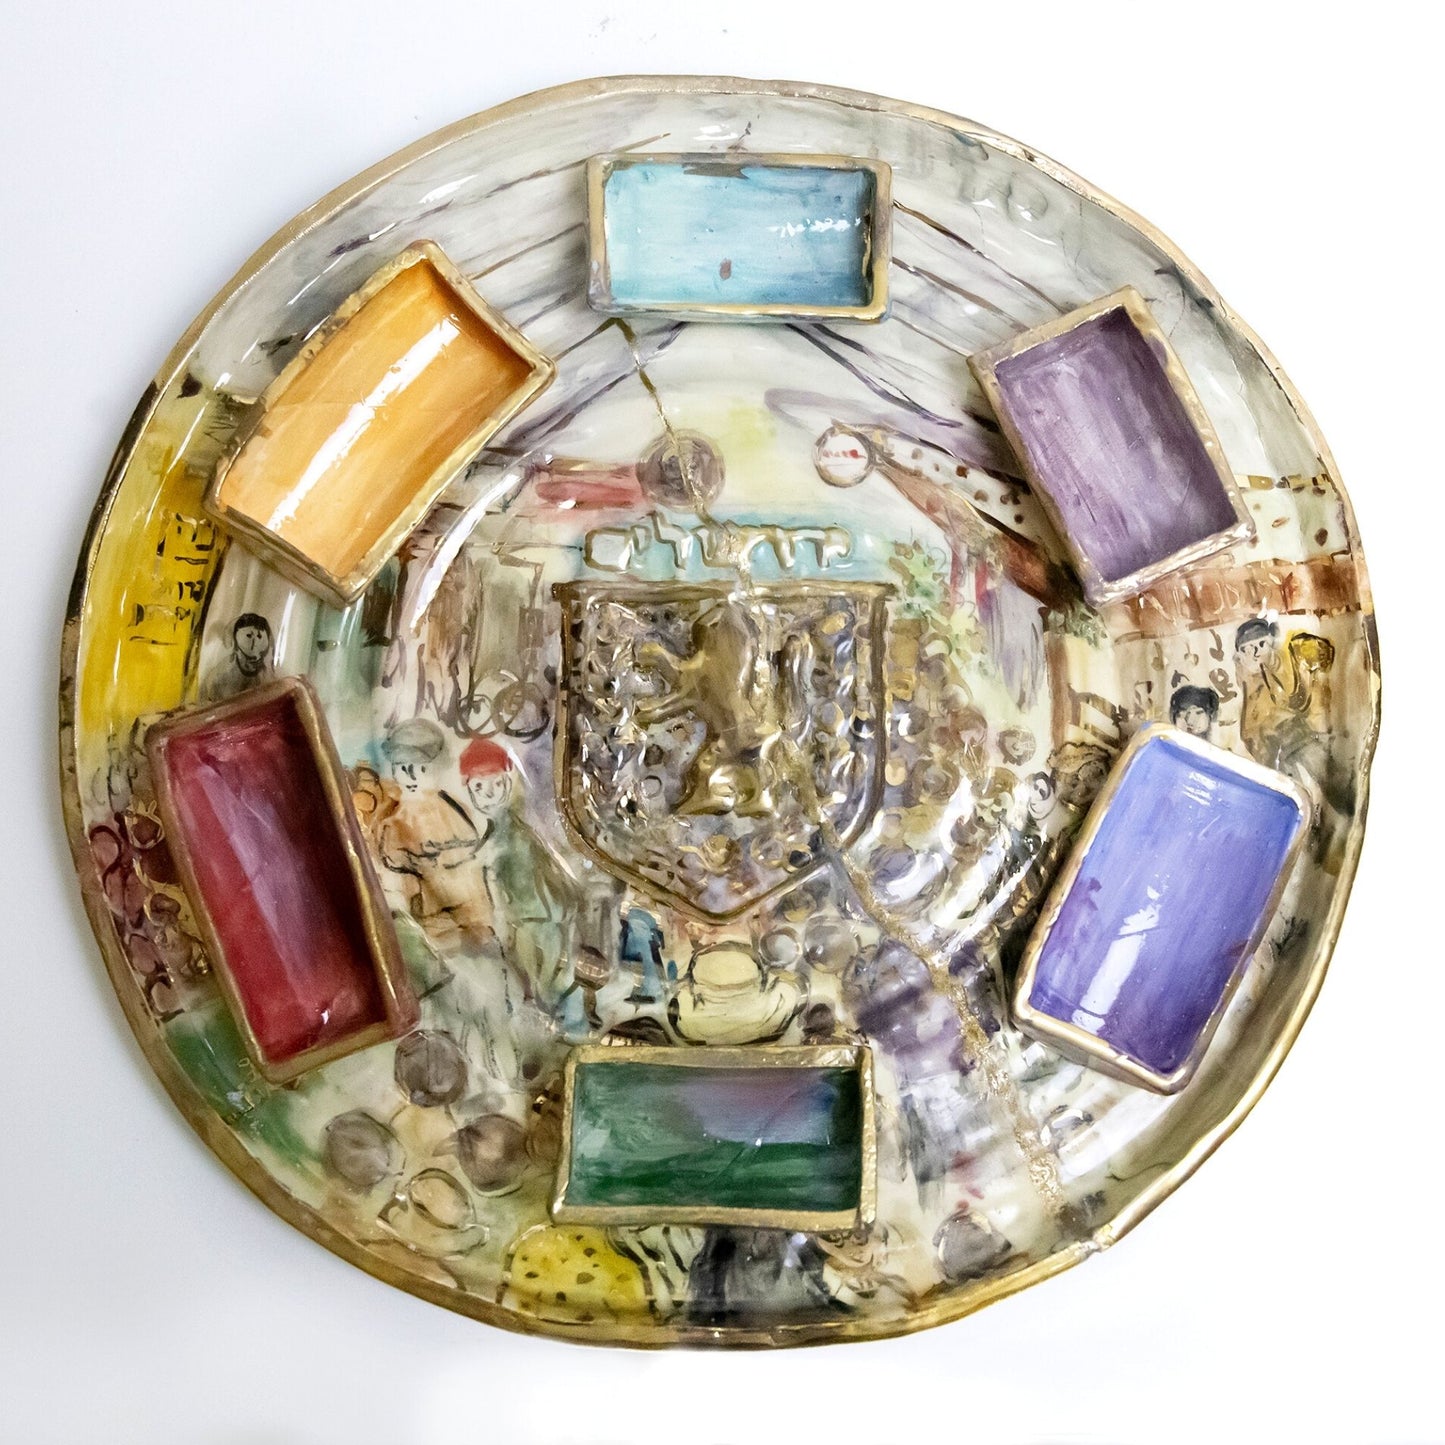 The Shuk Seder Plate